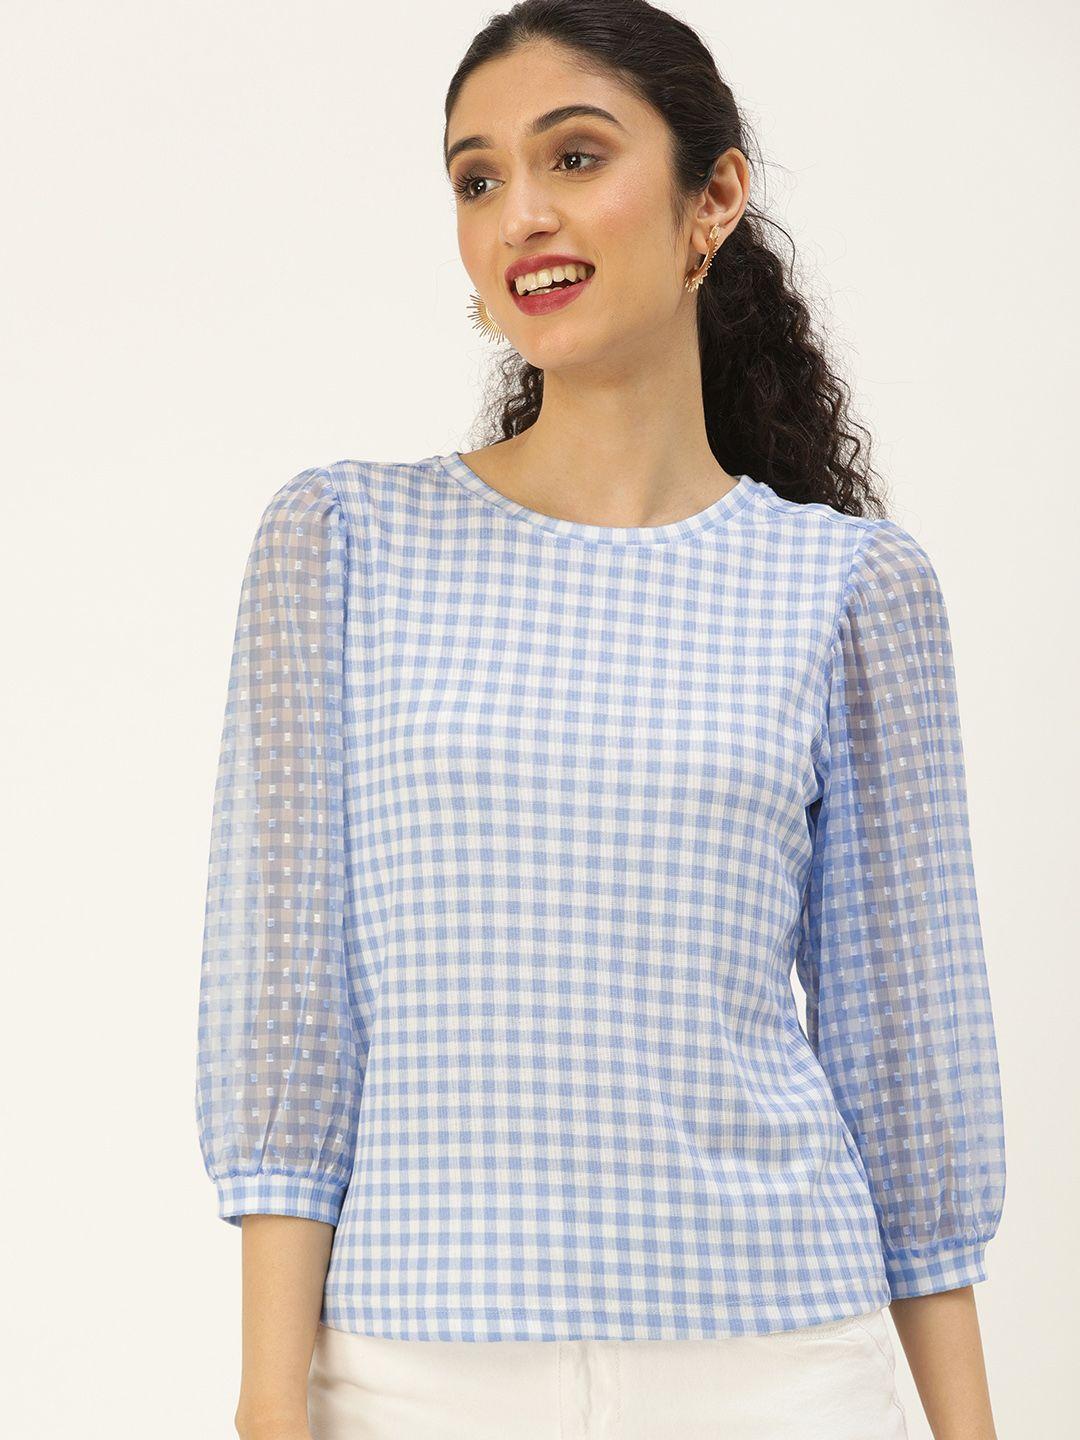 and-women-blue-&-white-checked--puff-sleeves-round-neck-top